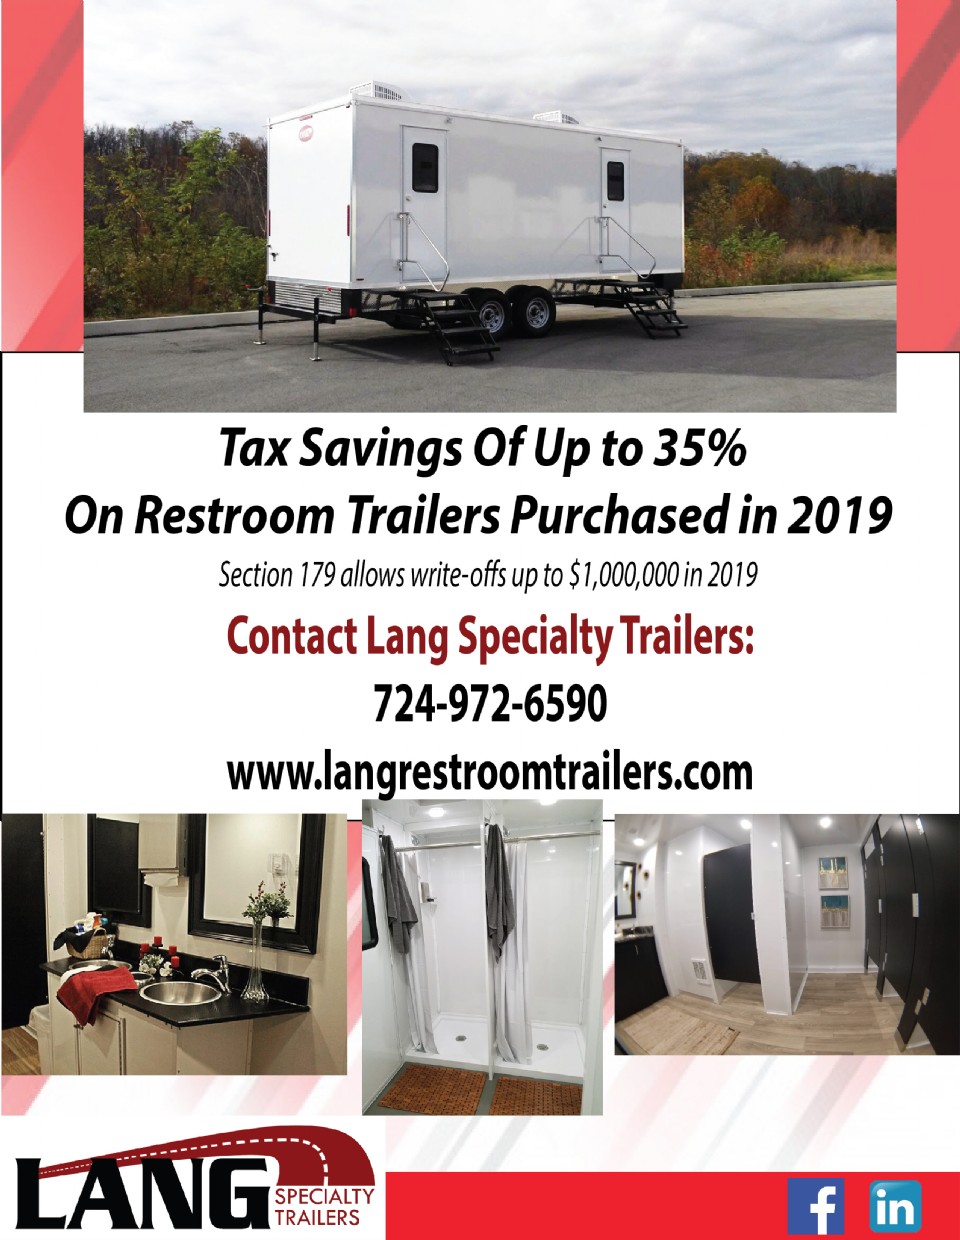 Tax Savings Of Up to 35% On Restroom Trailers Purchased in 2019